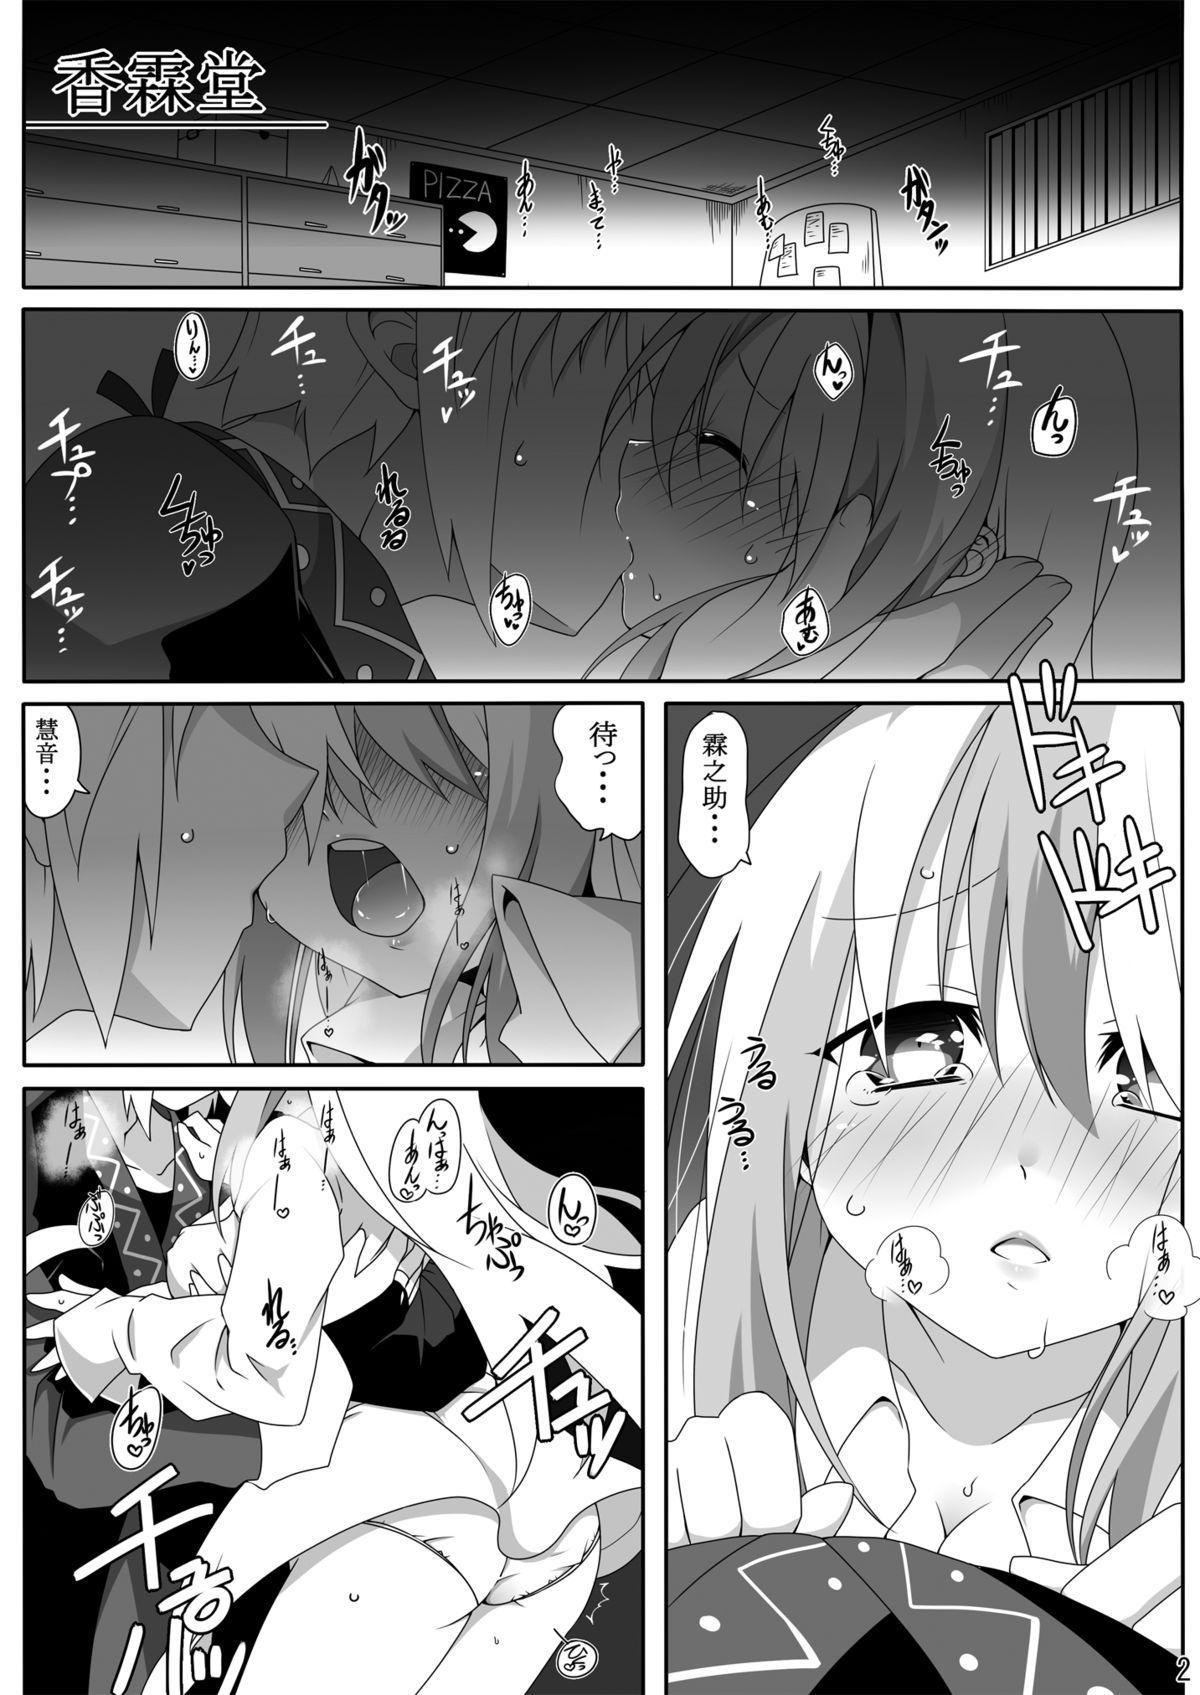 Pink Pussy Otona no Himitsu - Touhou project Girl Gets Fucked - Page 4